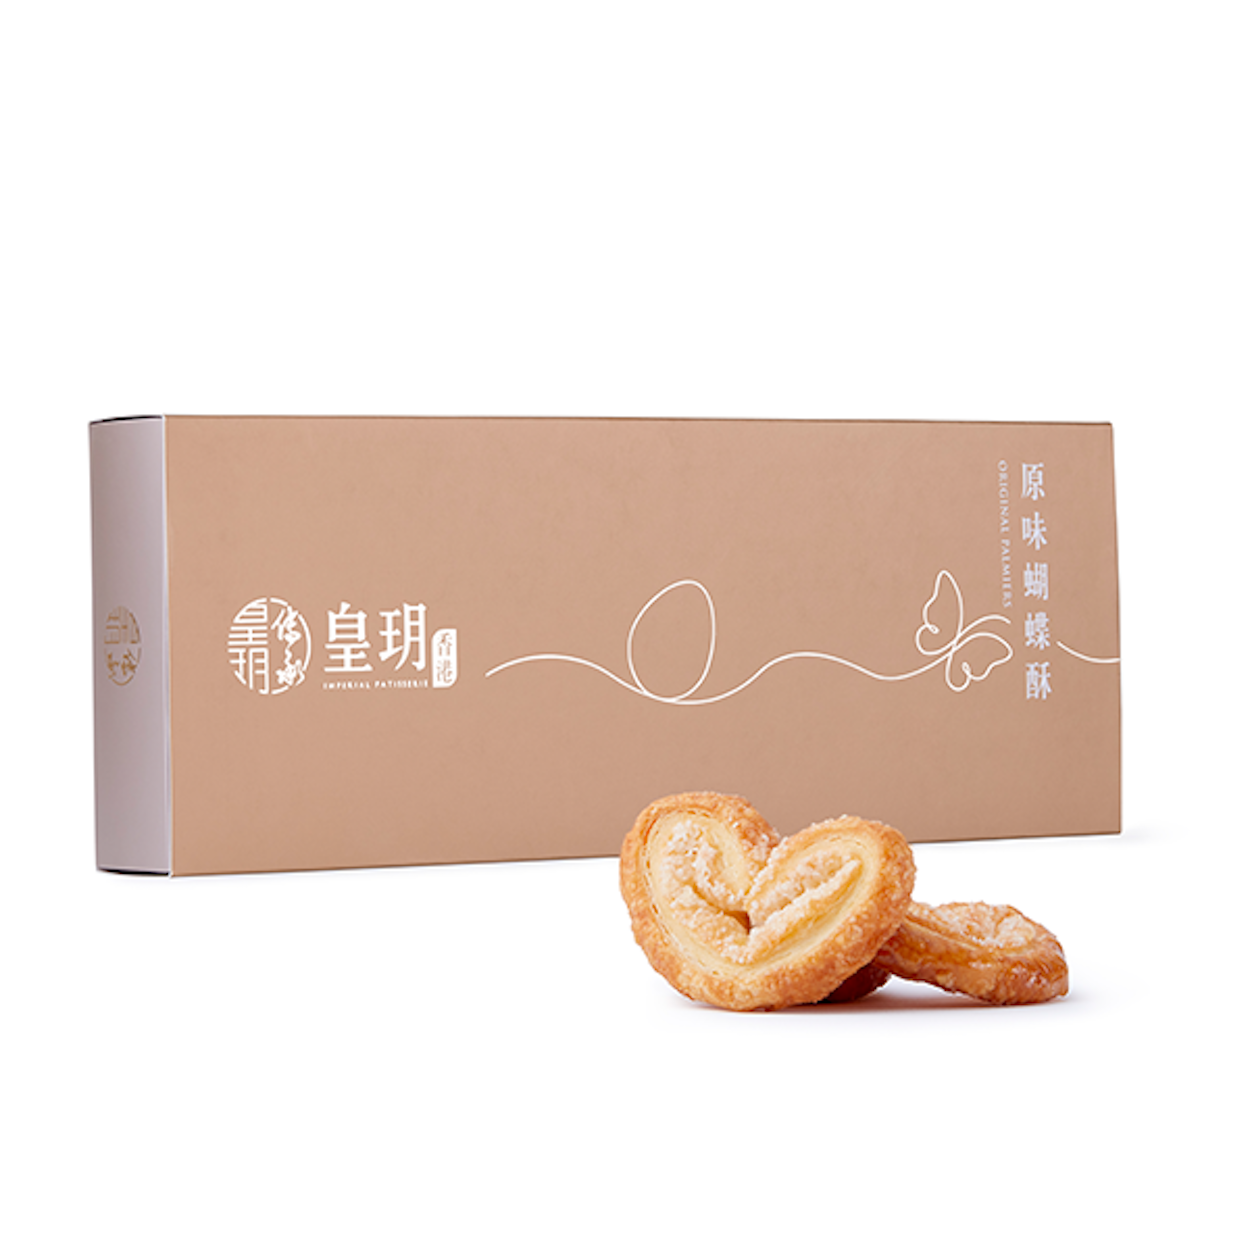 Imperial Patisserie Original Palmiers Delight Gift Set 皇玥 原味蝴蝶酥精裝禮盒